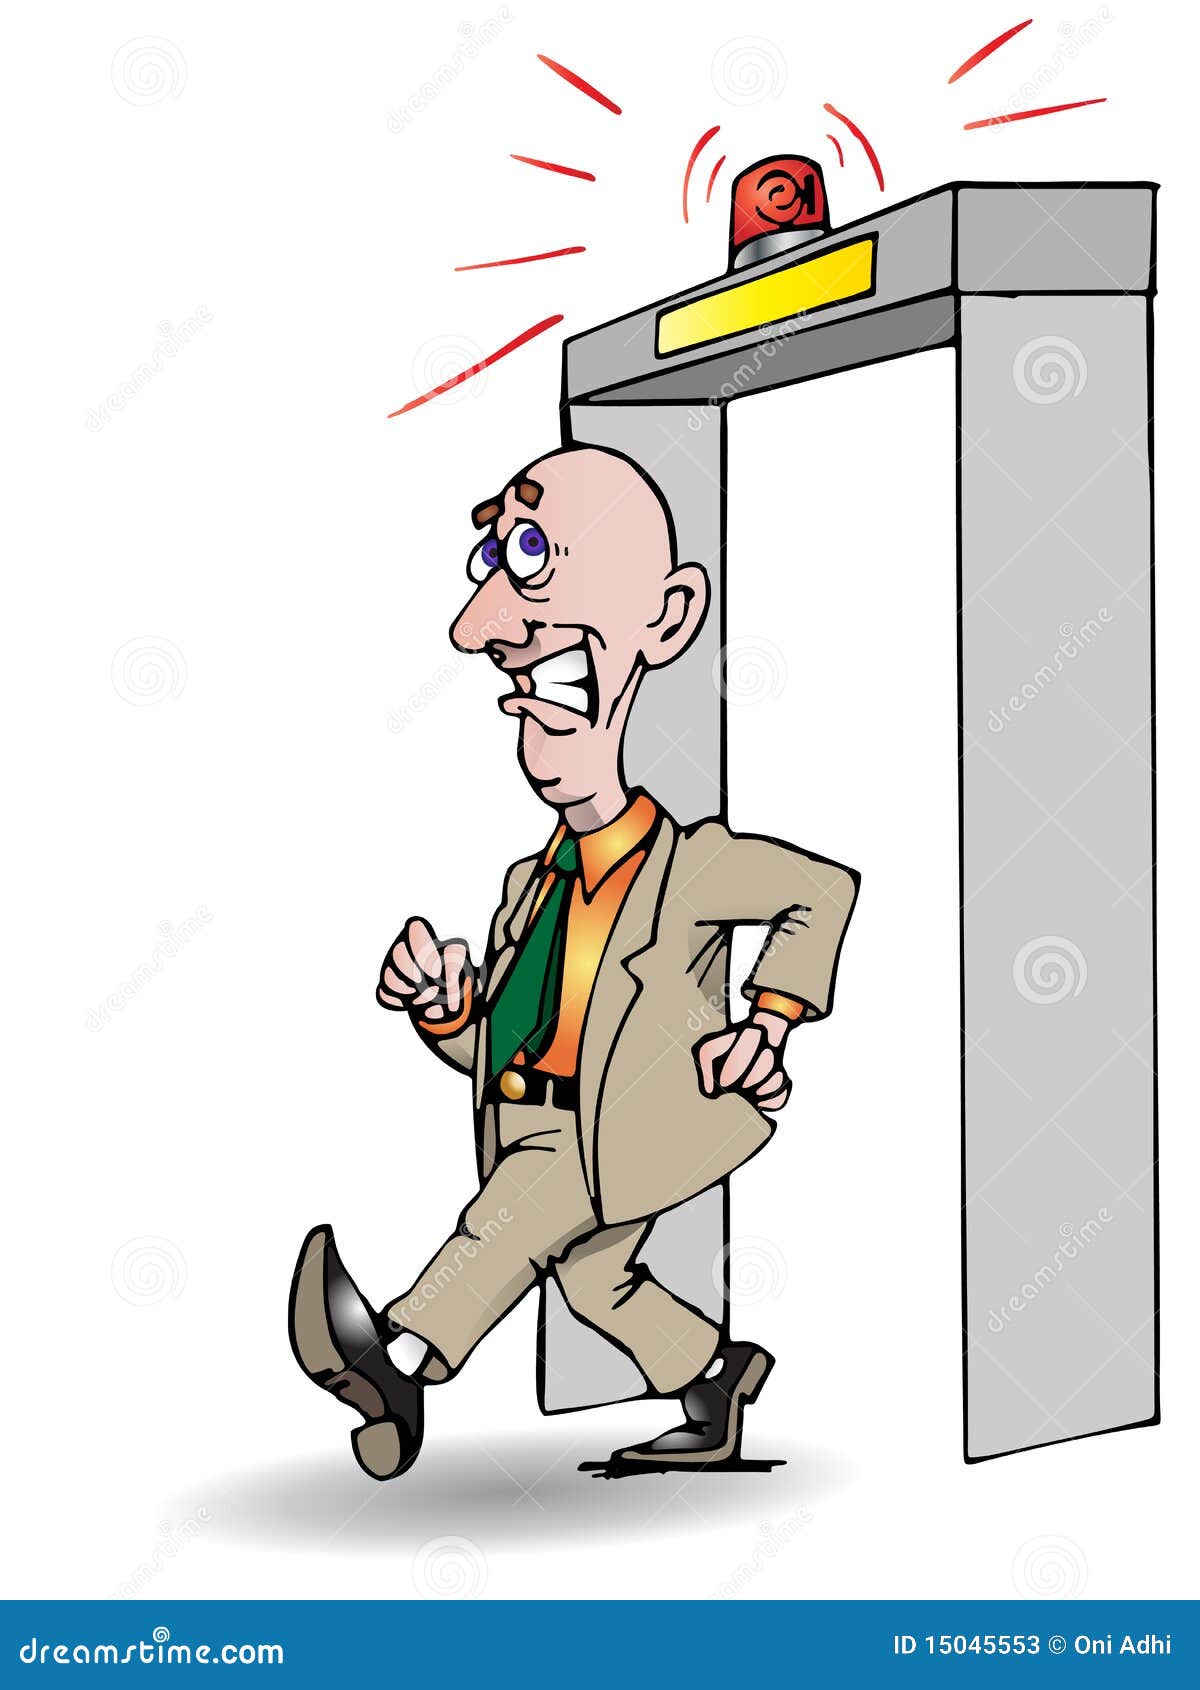 airport safety clipart - photo #4